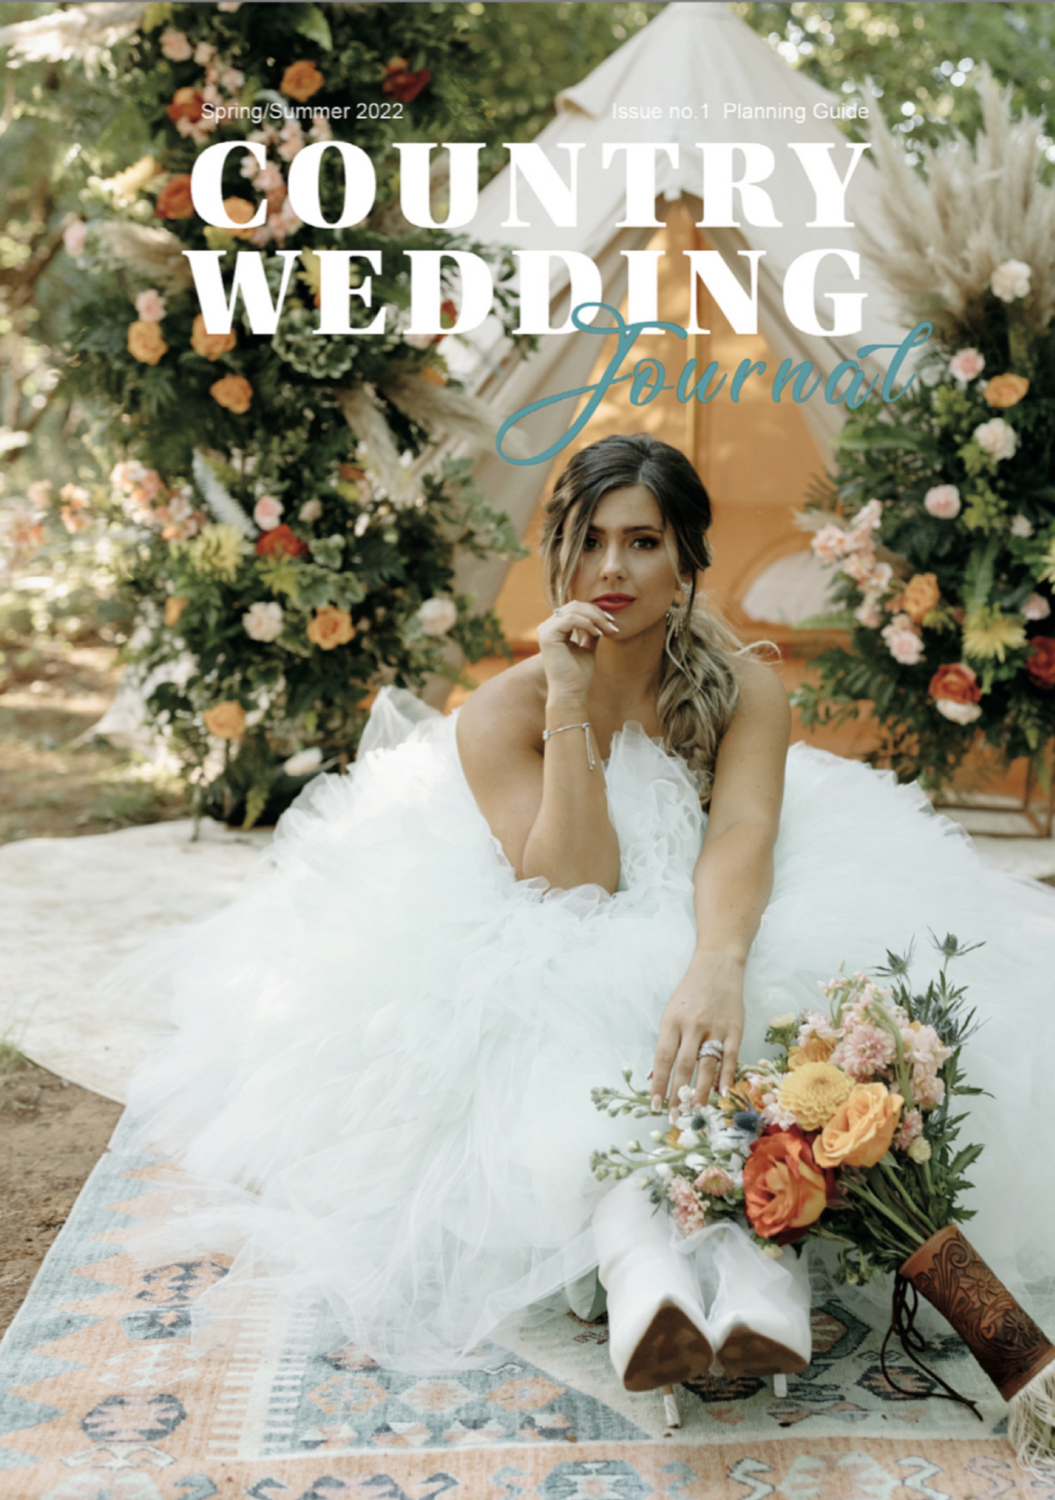 Country Wedding Journal (Magazine)- Physical Copy. Issue 1